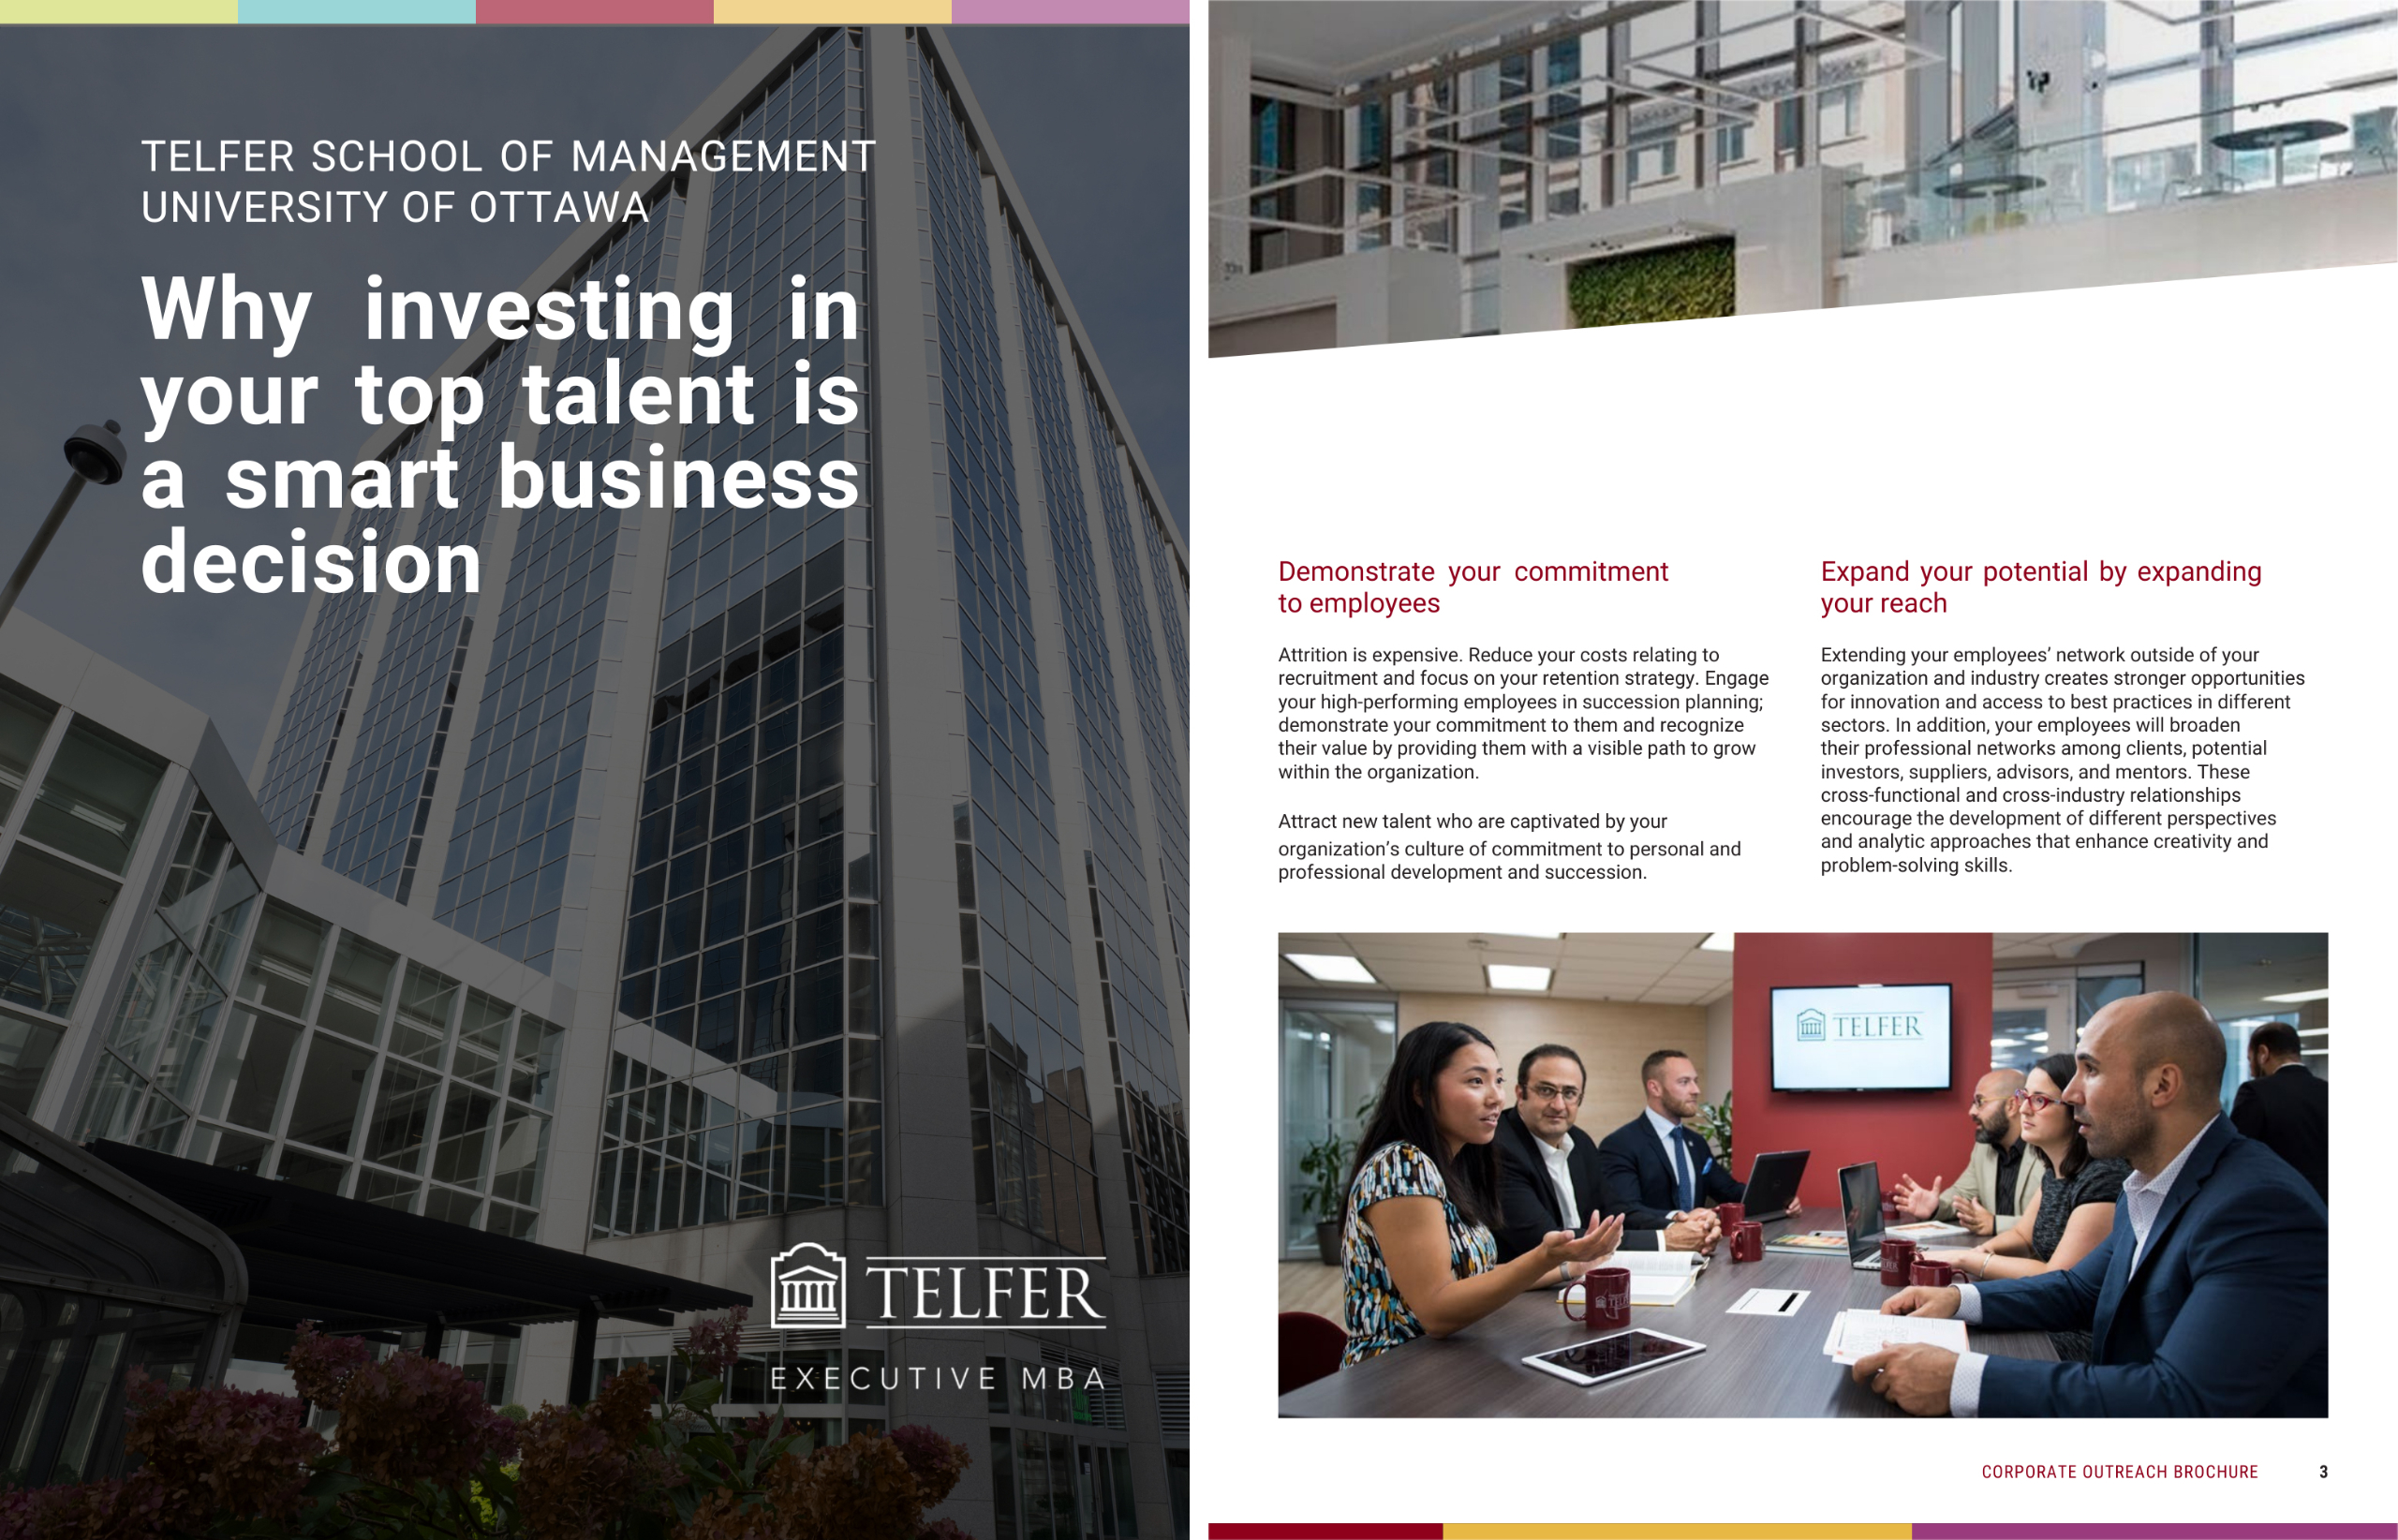 Original photo of Telfer EMBA’s corporate outreach brochure, titled” Why investing in your top talent is a smart business decision.” 